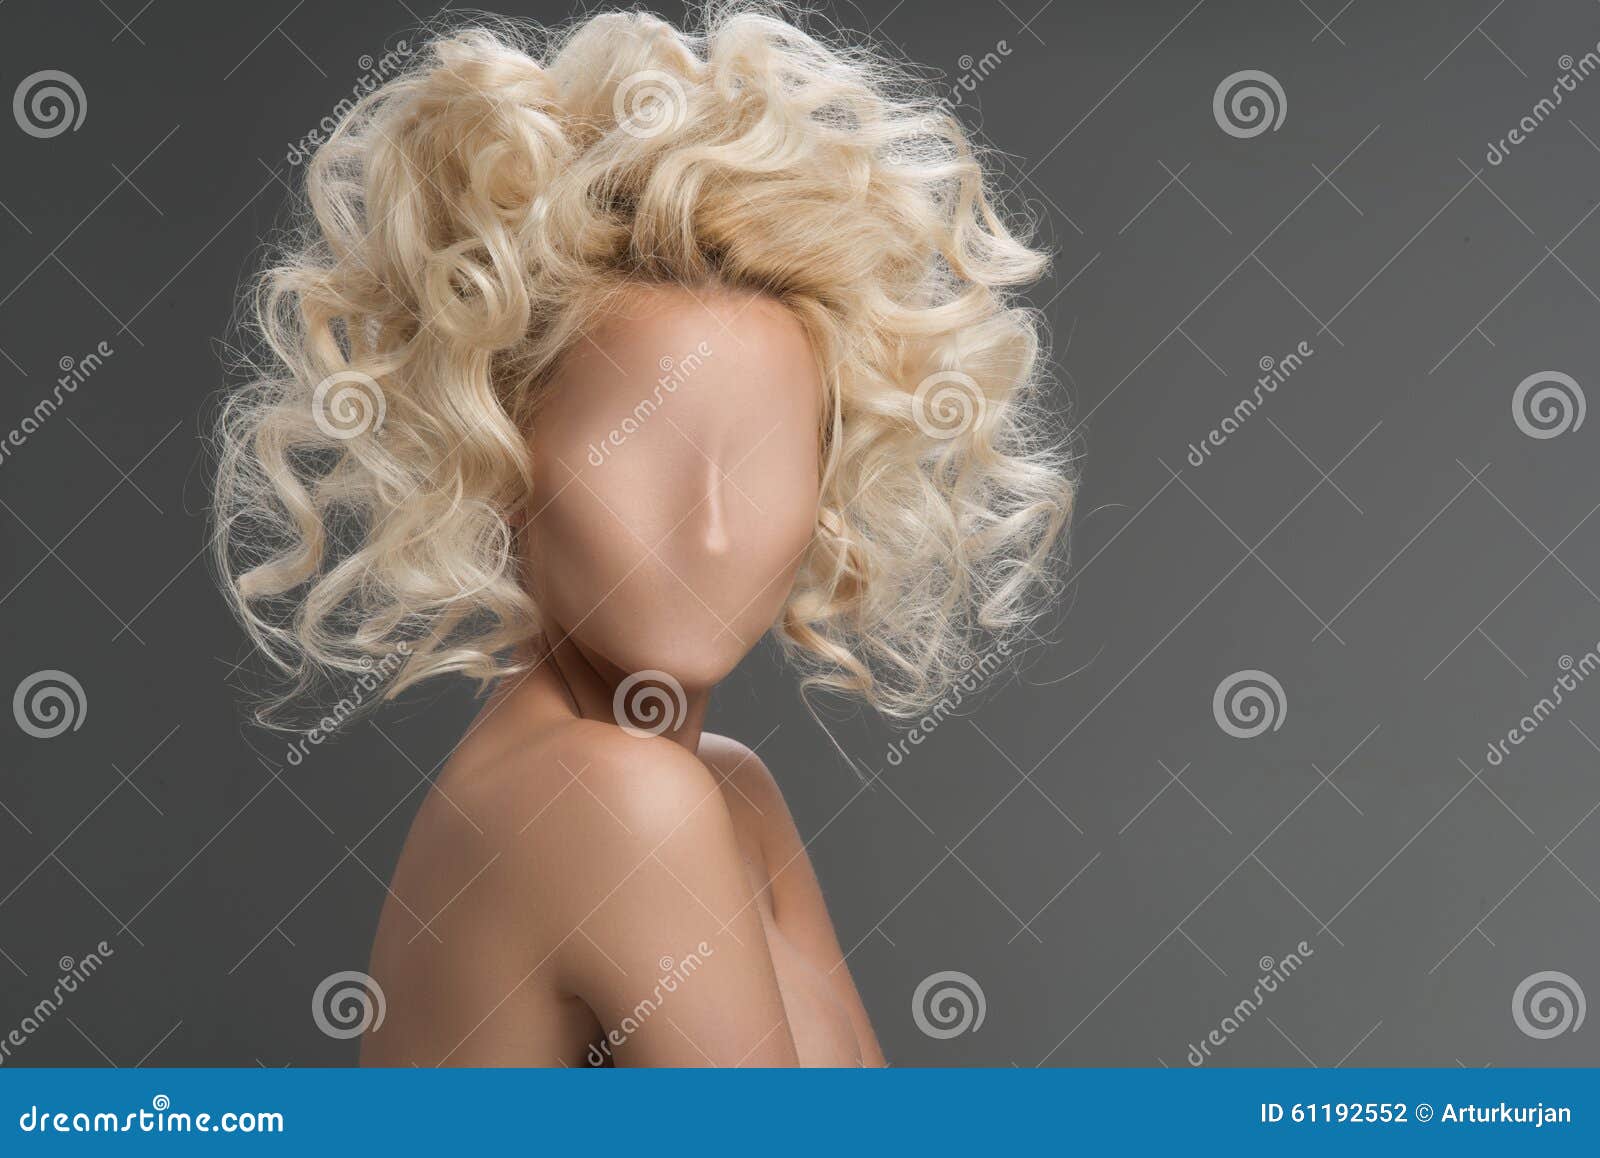 blonde hair without face